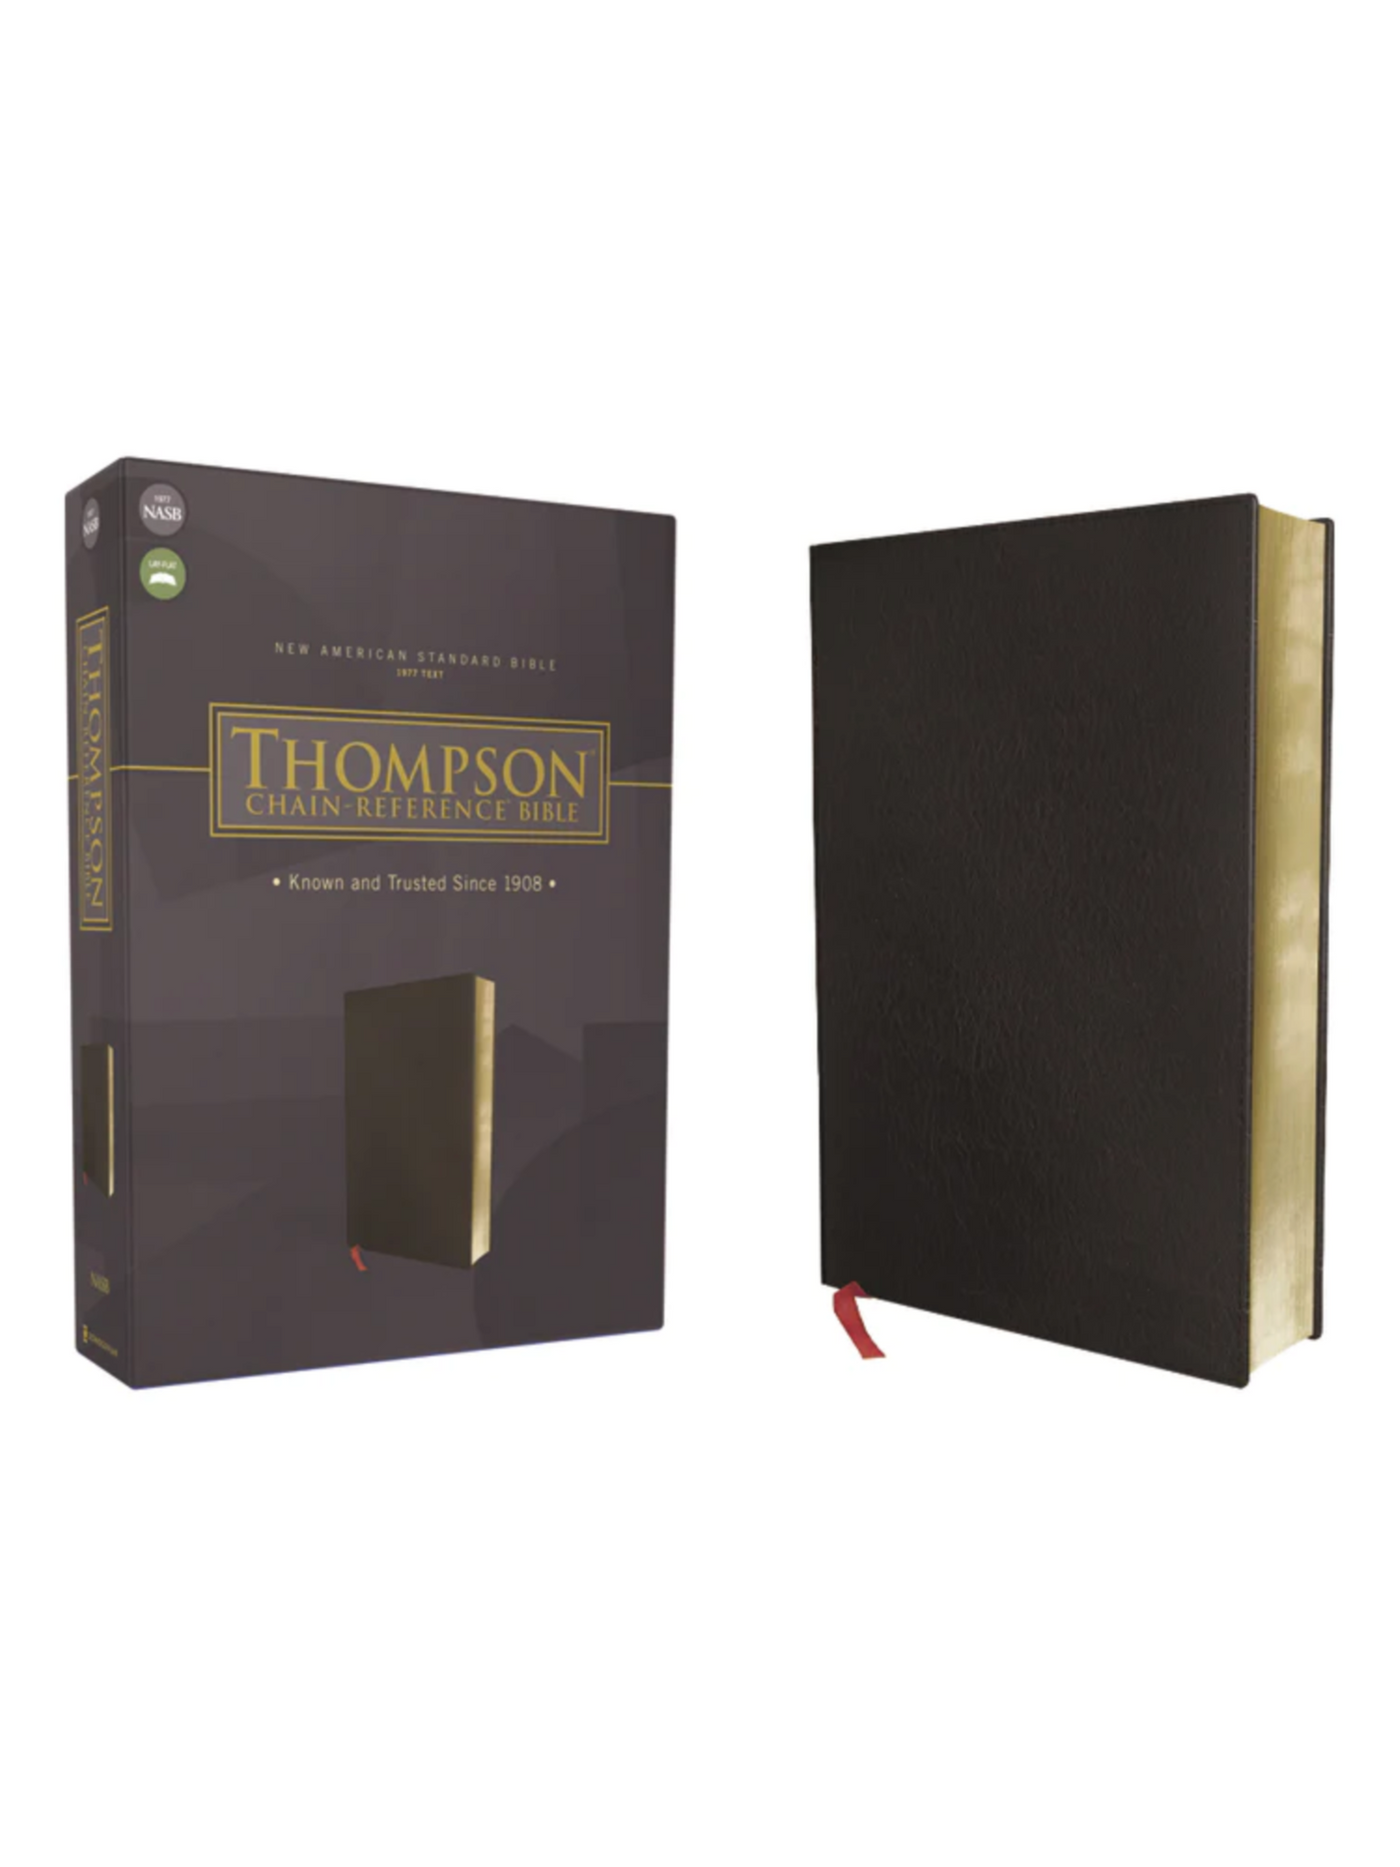 NASB Thompson Chain Reference Bible front cover and Bible front.